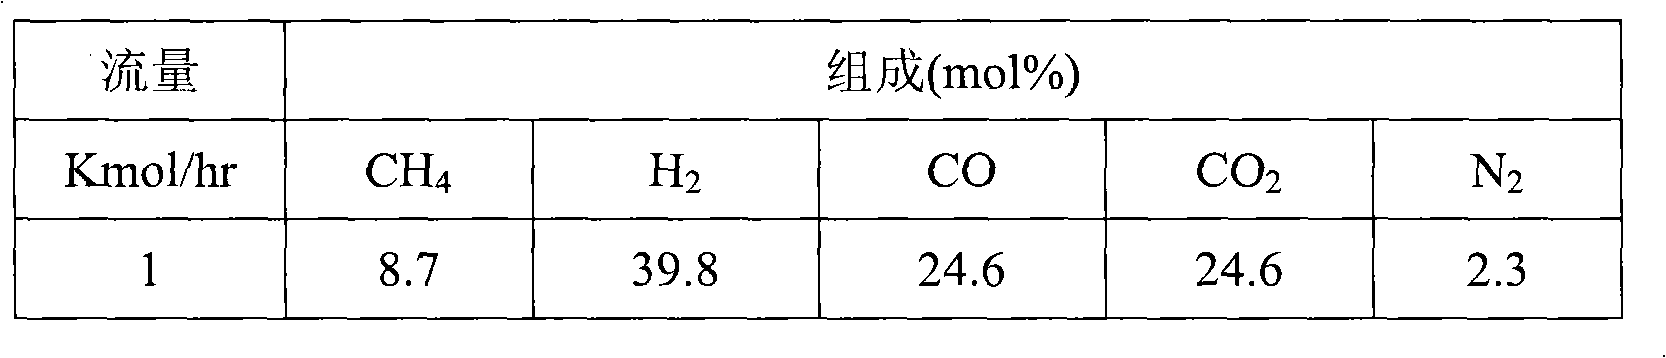 Method and device for preparing synthetic natural gas